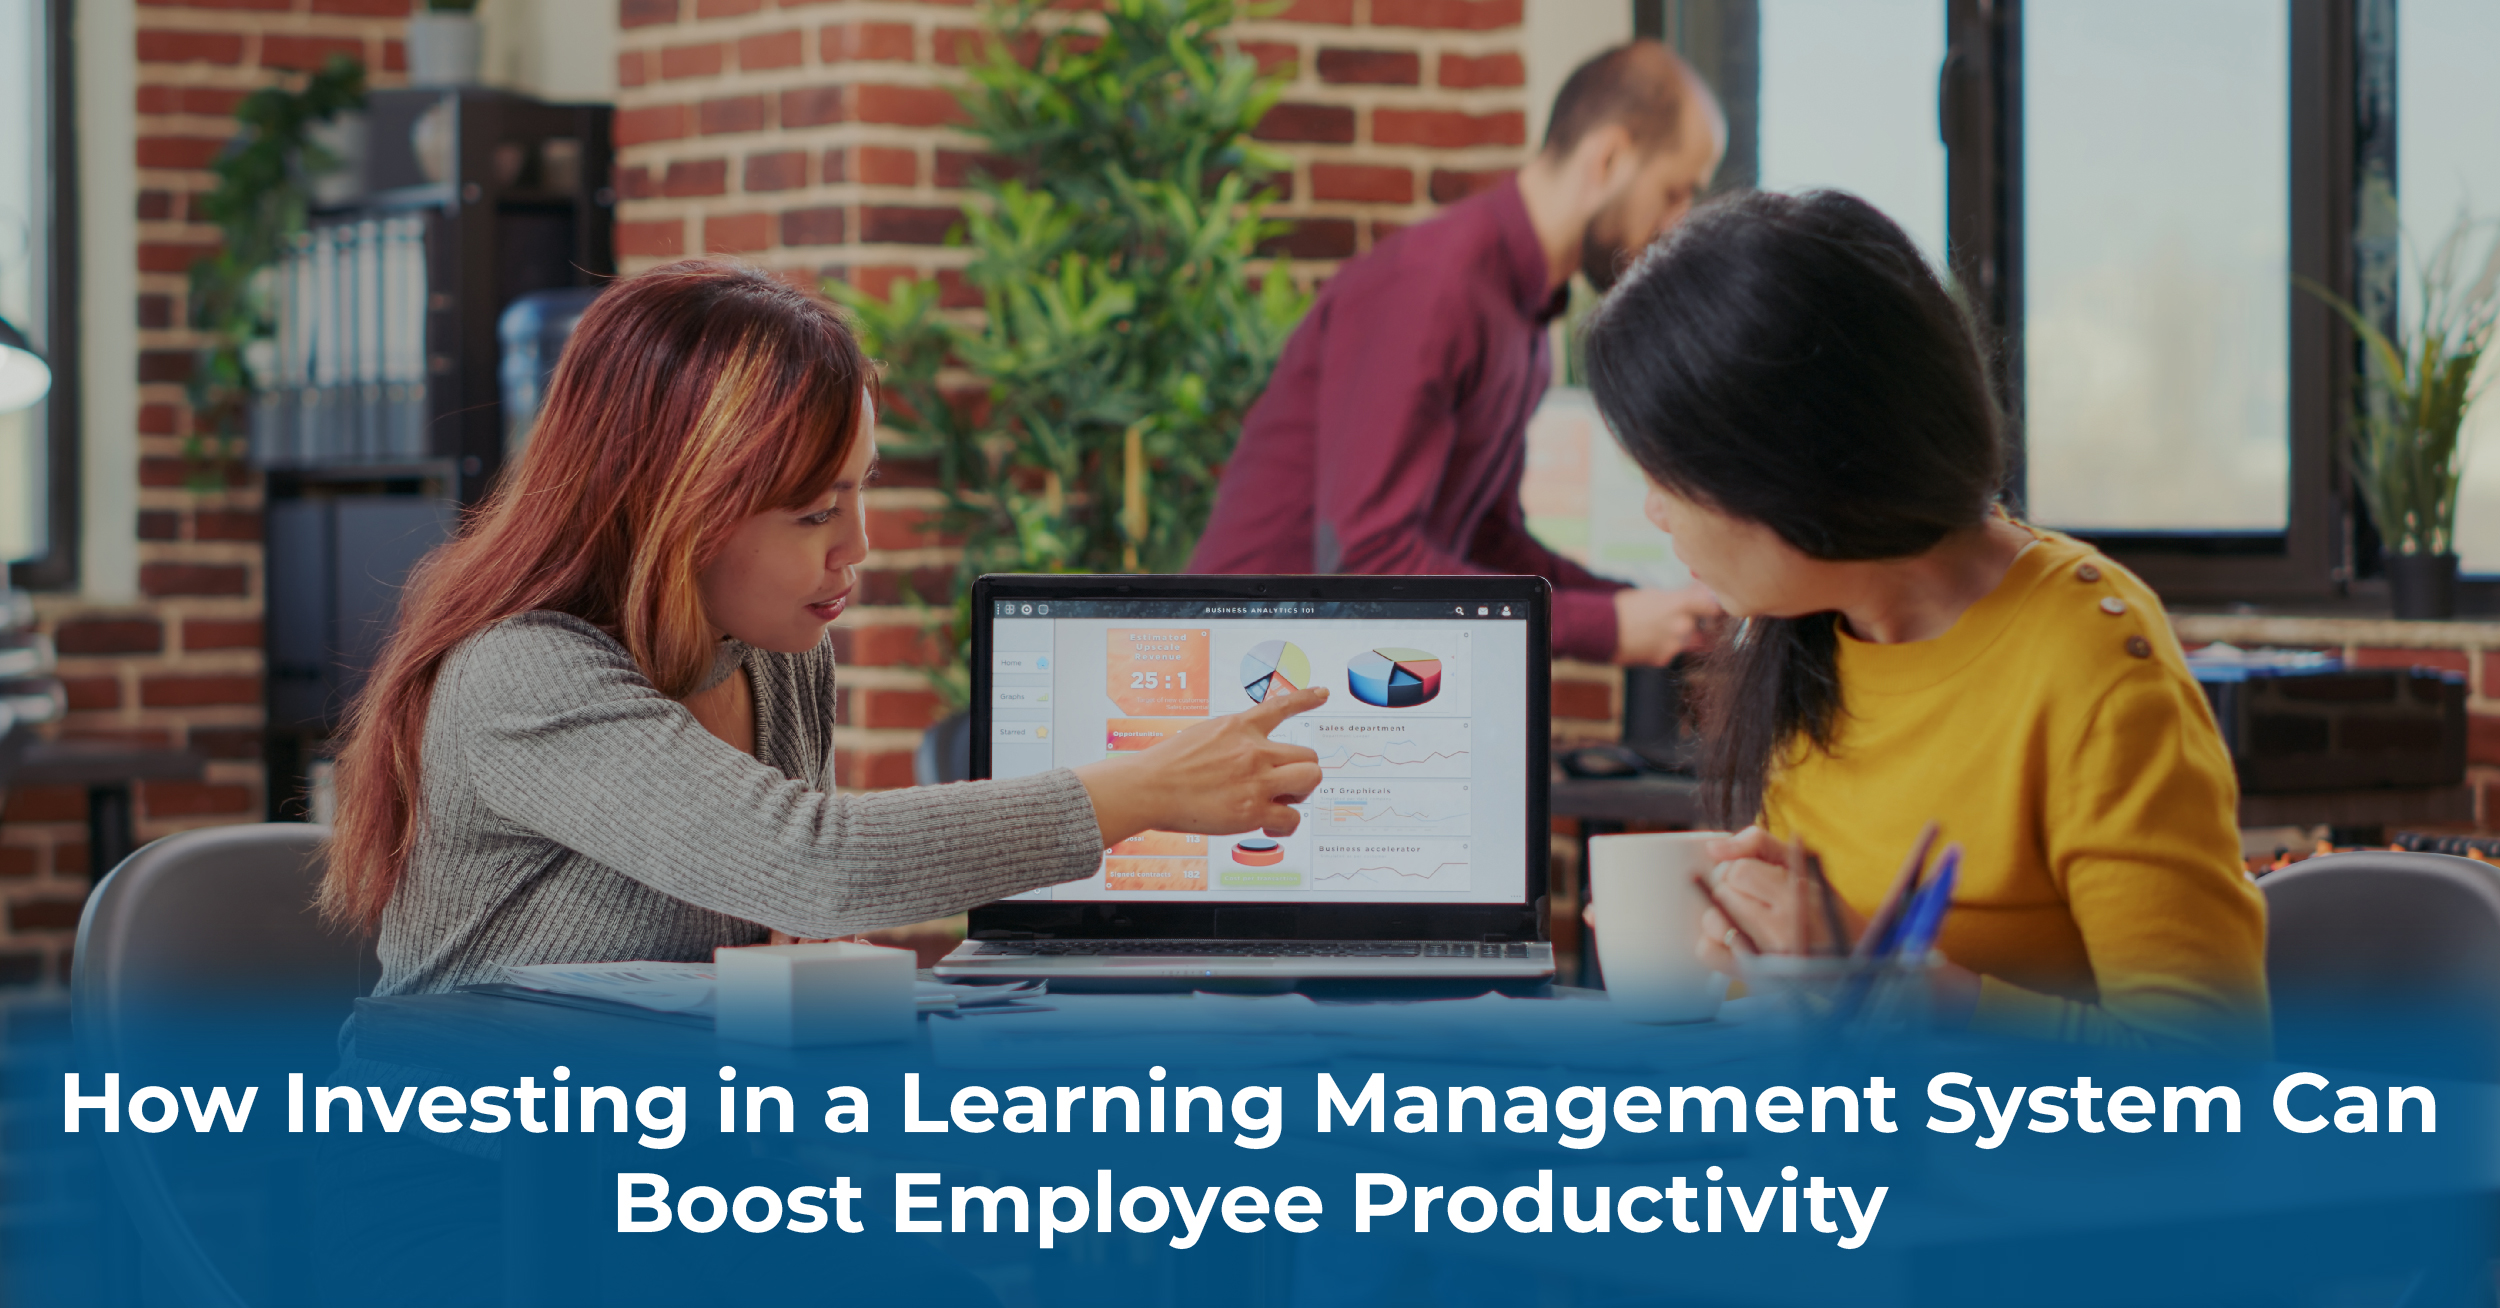 How Investing in a Learning Management System Can Boost Employee Productivity